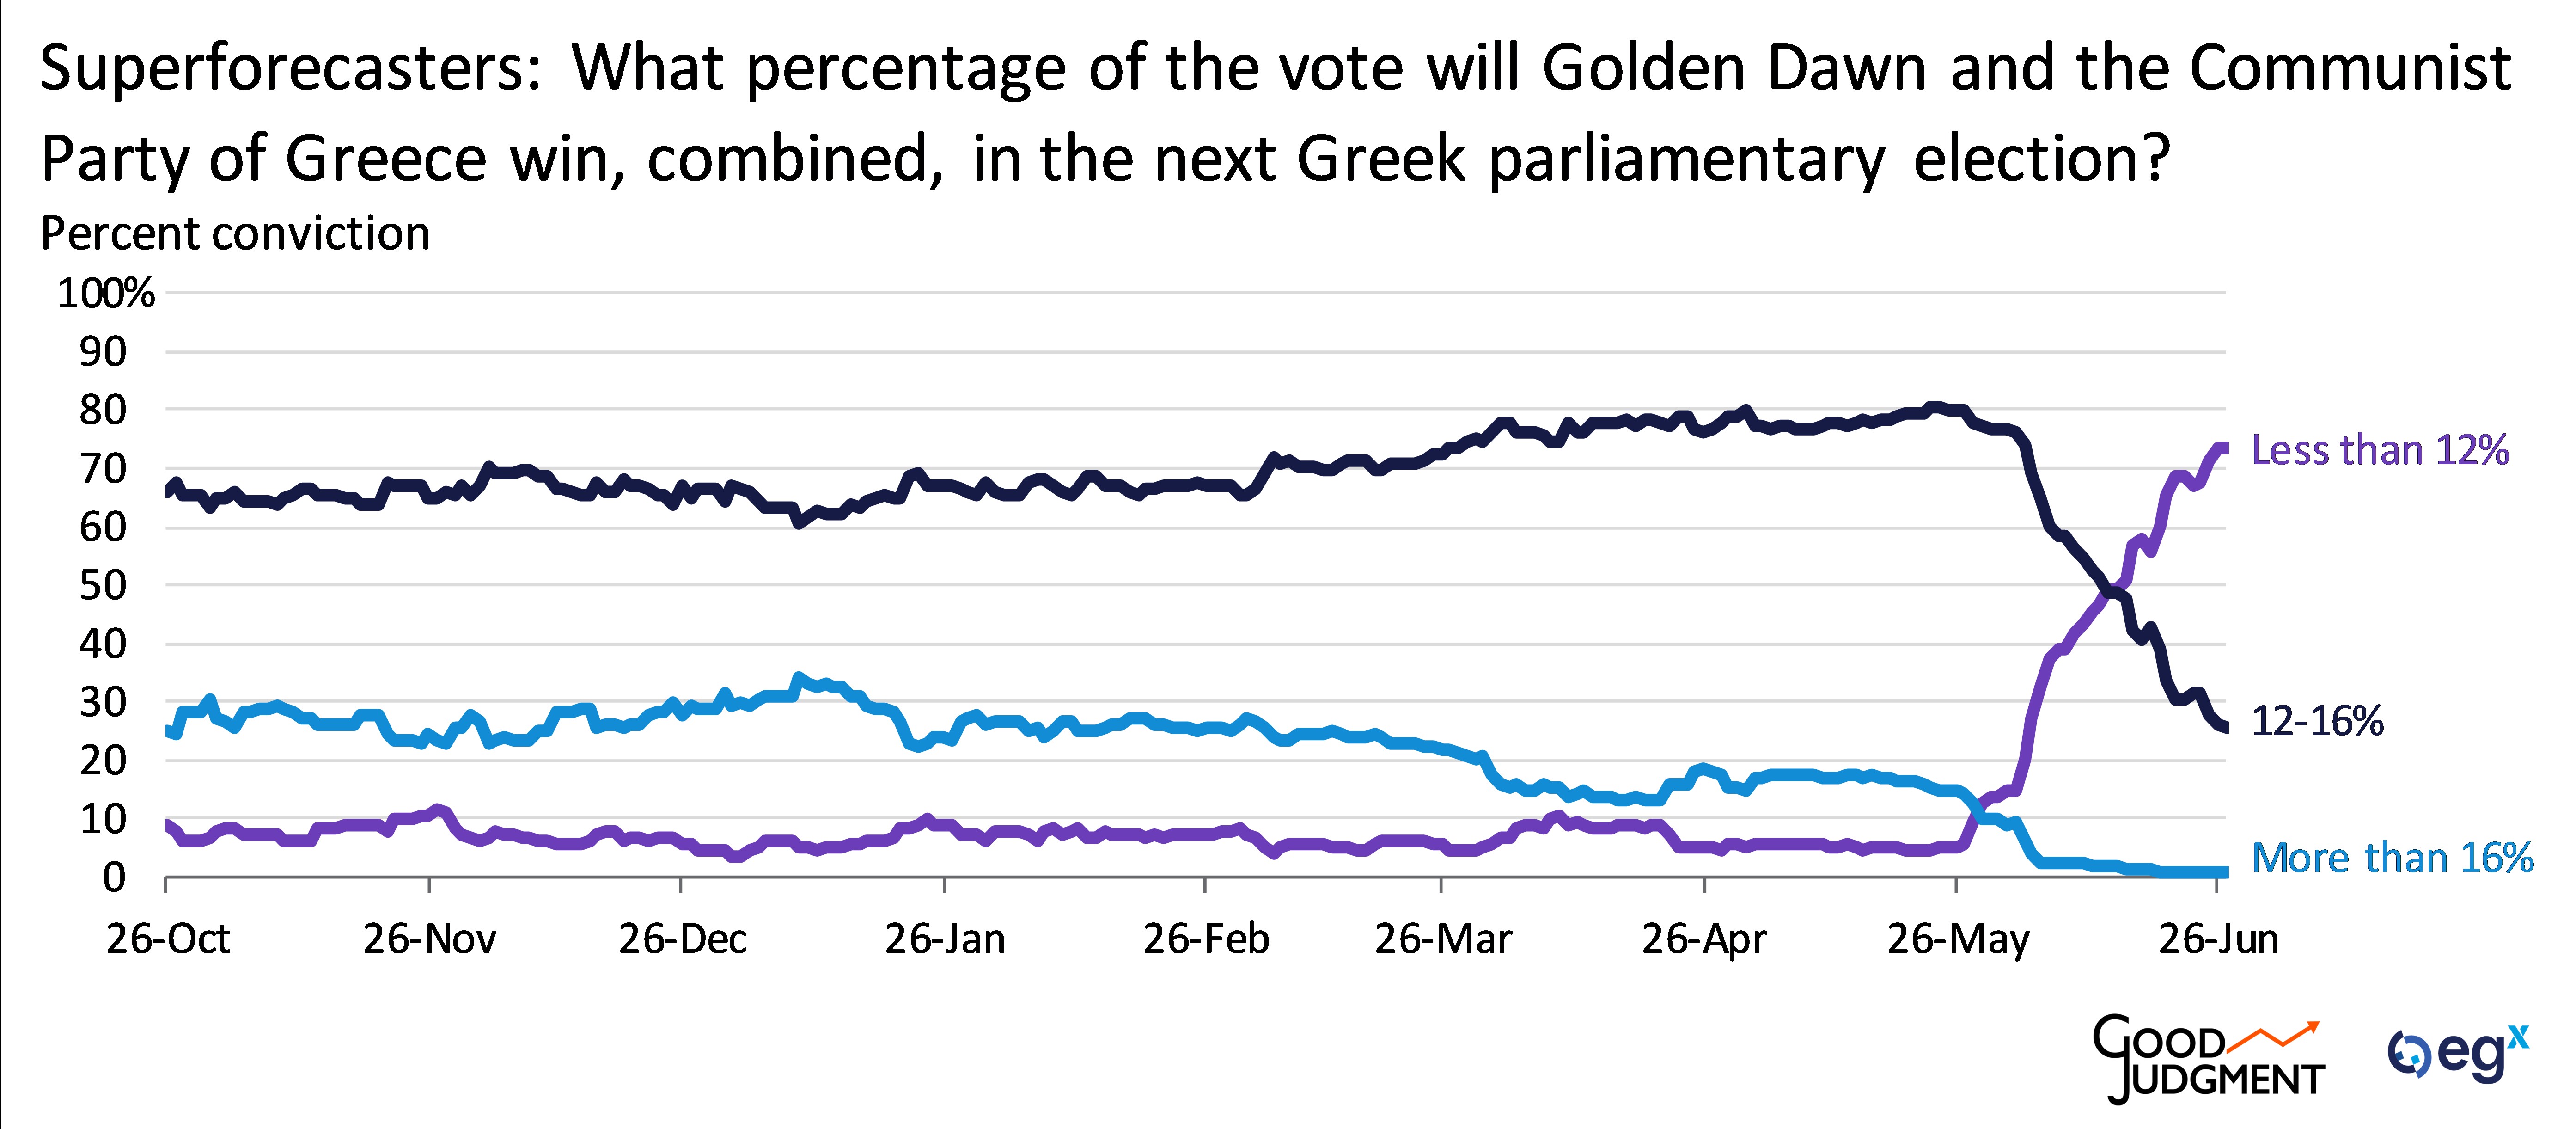 Superforecast projecting the percentage of the vote that Golden Dawn and the Communist Party of Greece will win in the next Greek parliamentary election